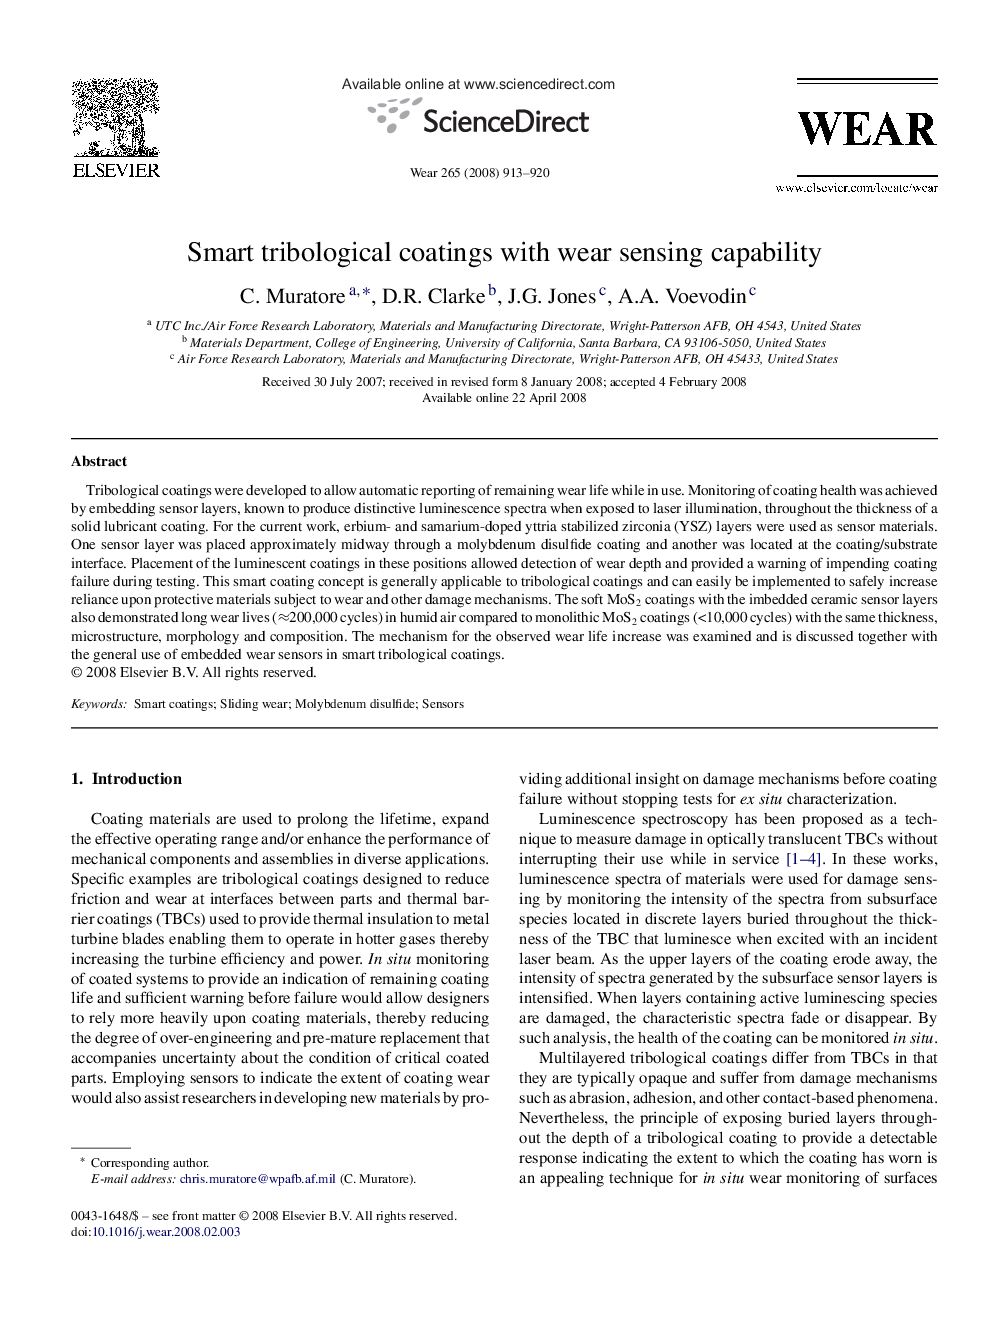 Smart tribological coatings with wear sensing capability